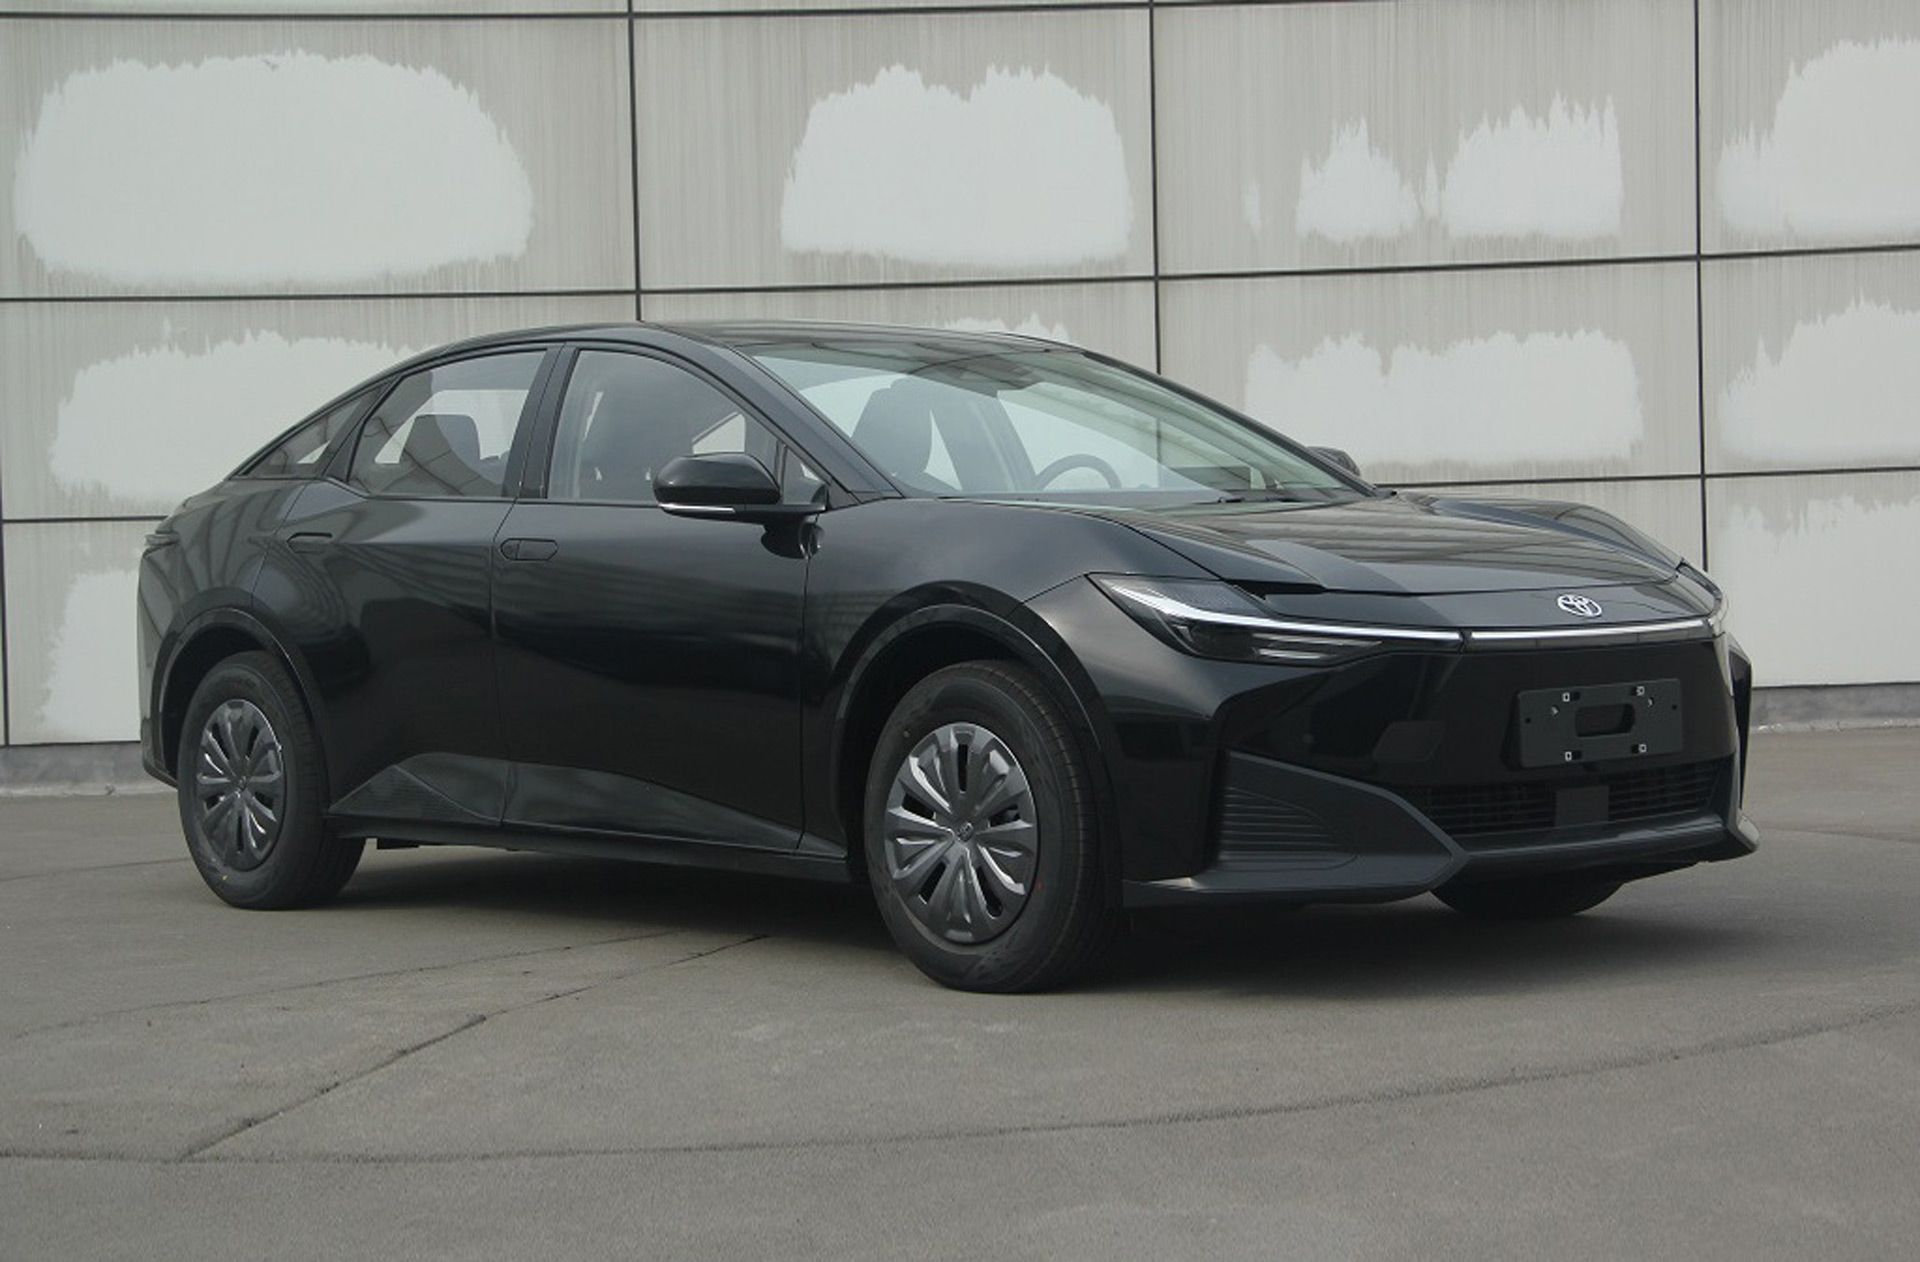 Toyota BZ3 is a Corolla-size electric sedan coming to challenge the Model 3 Auto Recent